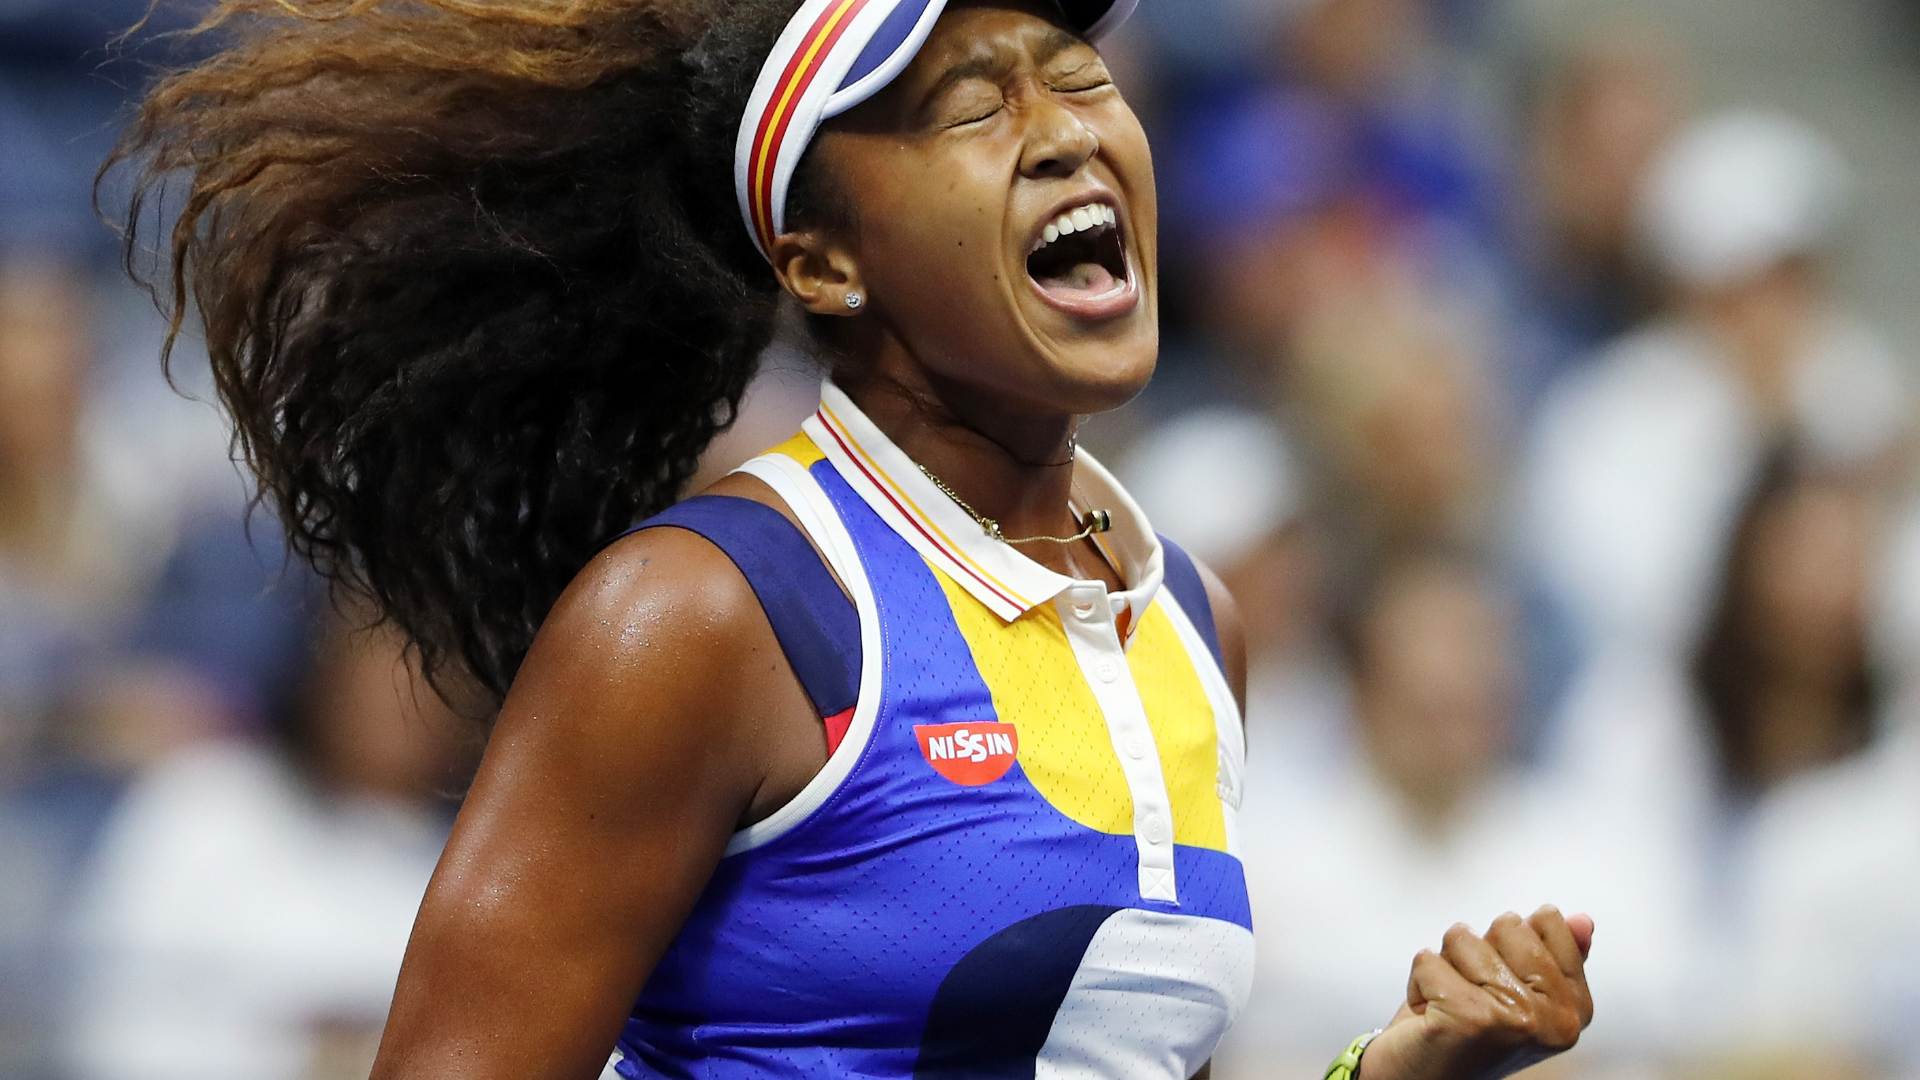 Naomi Osaka Saves a Butterfly That Lands on Her Face in the Middle